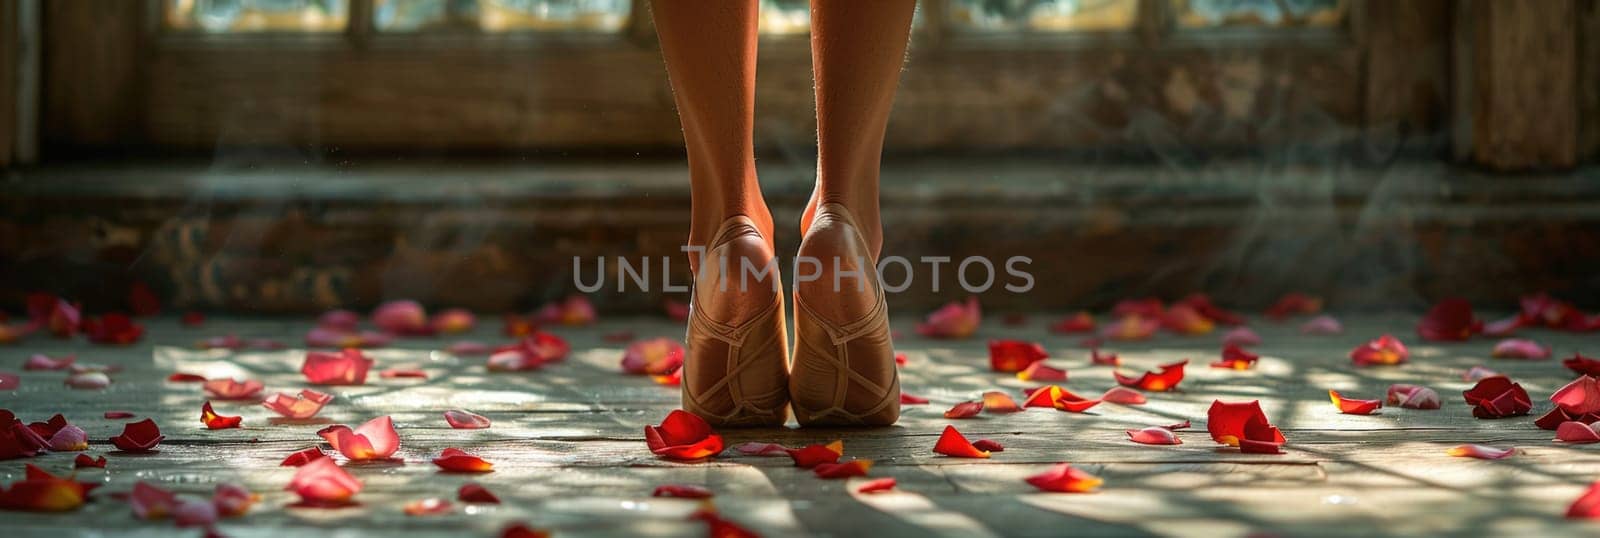 Womans Legs in High Heels Surrounded by Rose Petals by but_photo